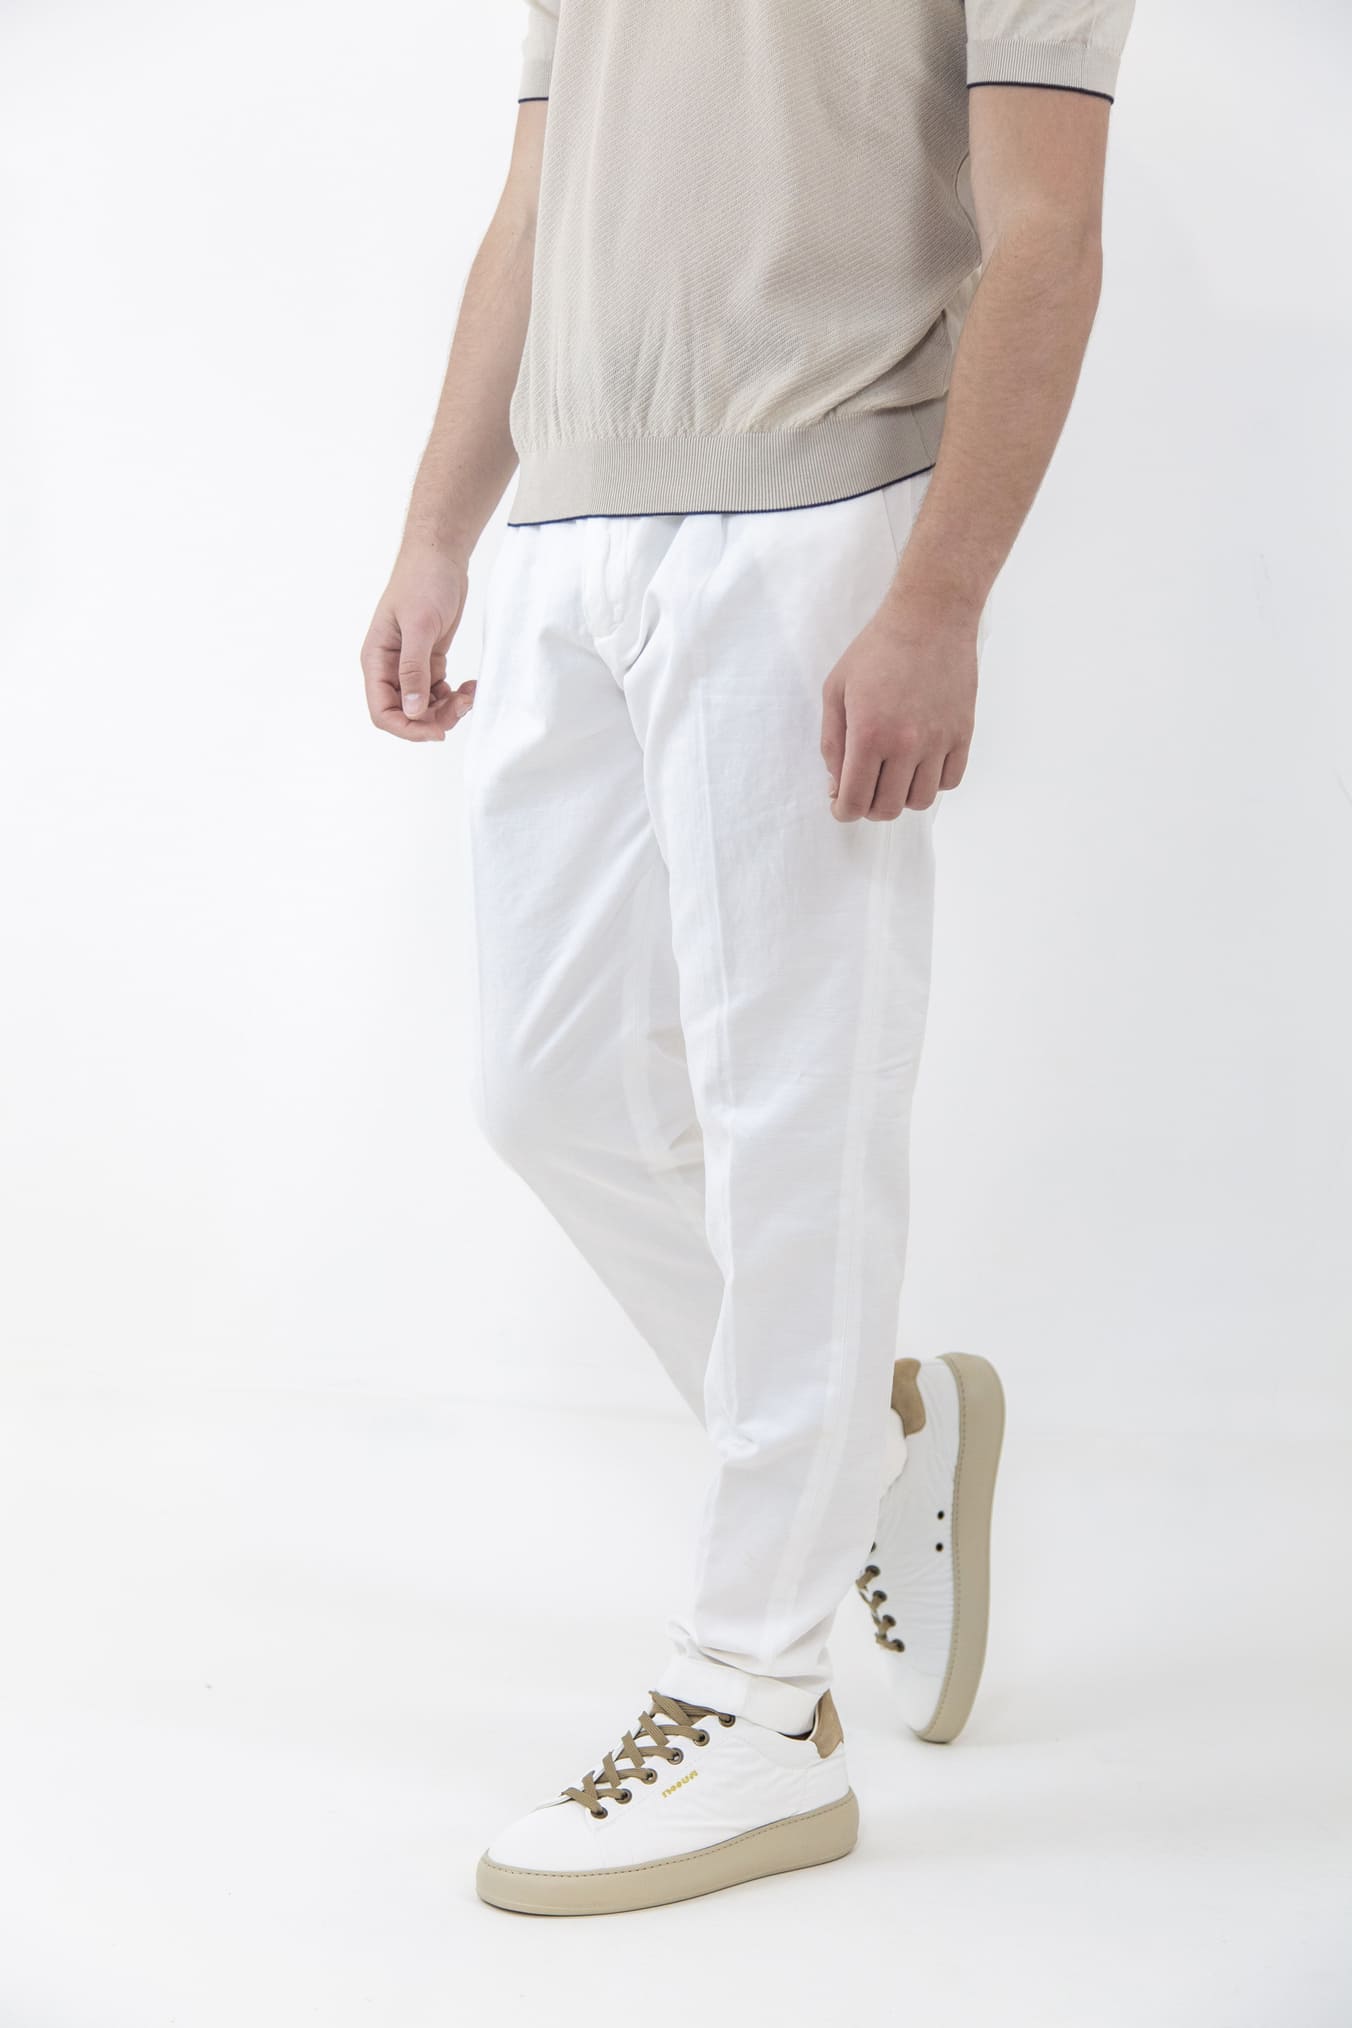 GUARINO White Cotton and Linen Trousers with Pleats